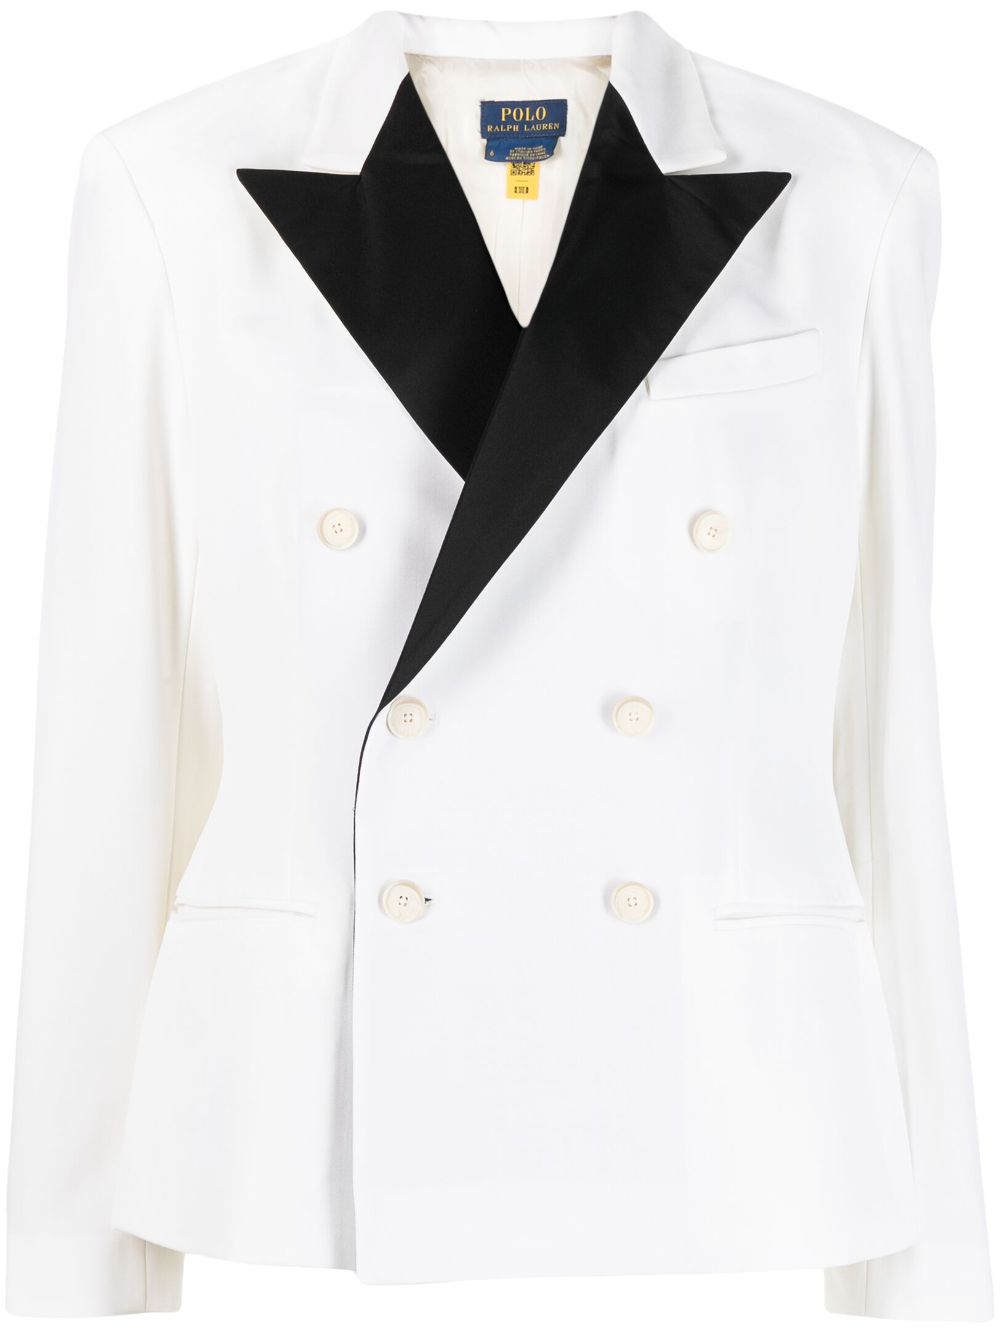 Image 1 of Polo Ralph Lauren Astor double-breasted blazer